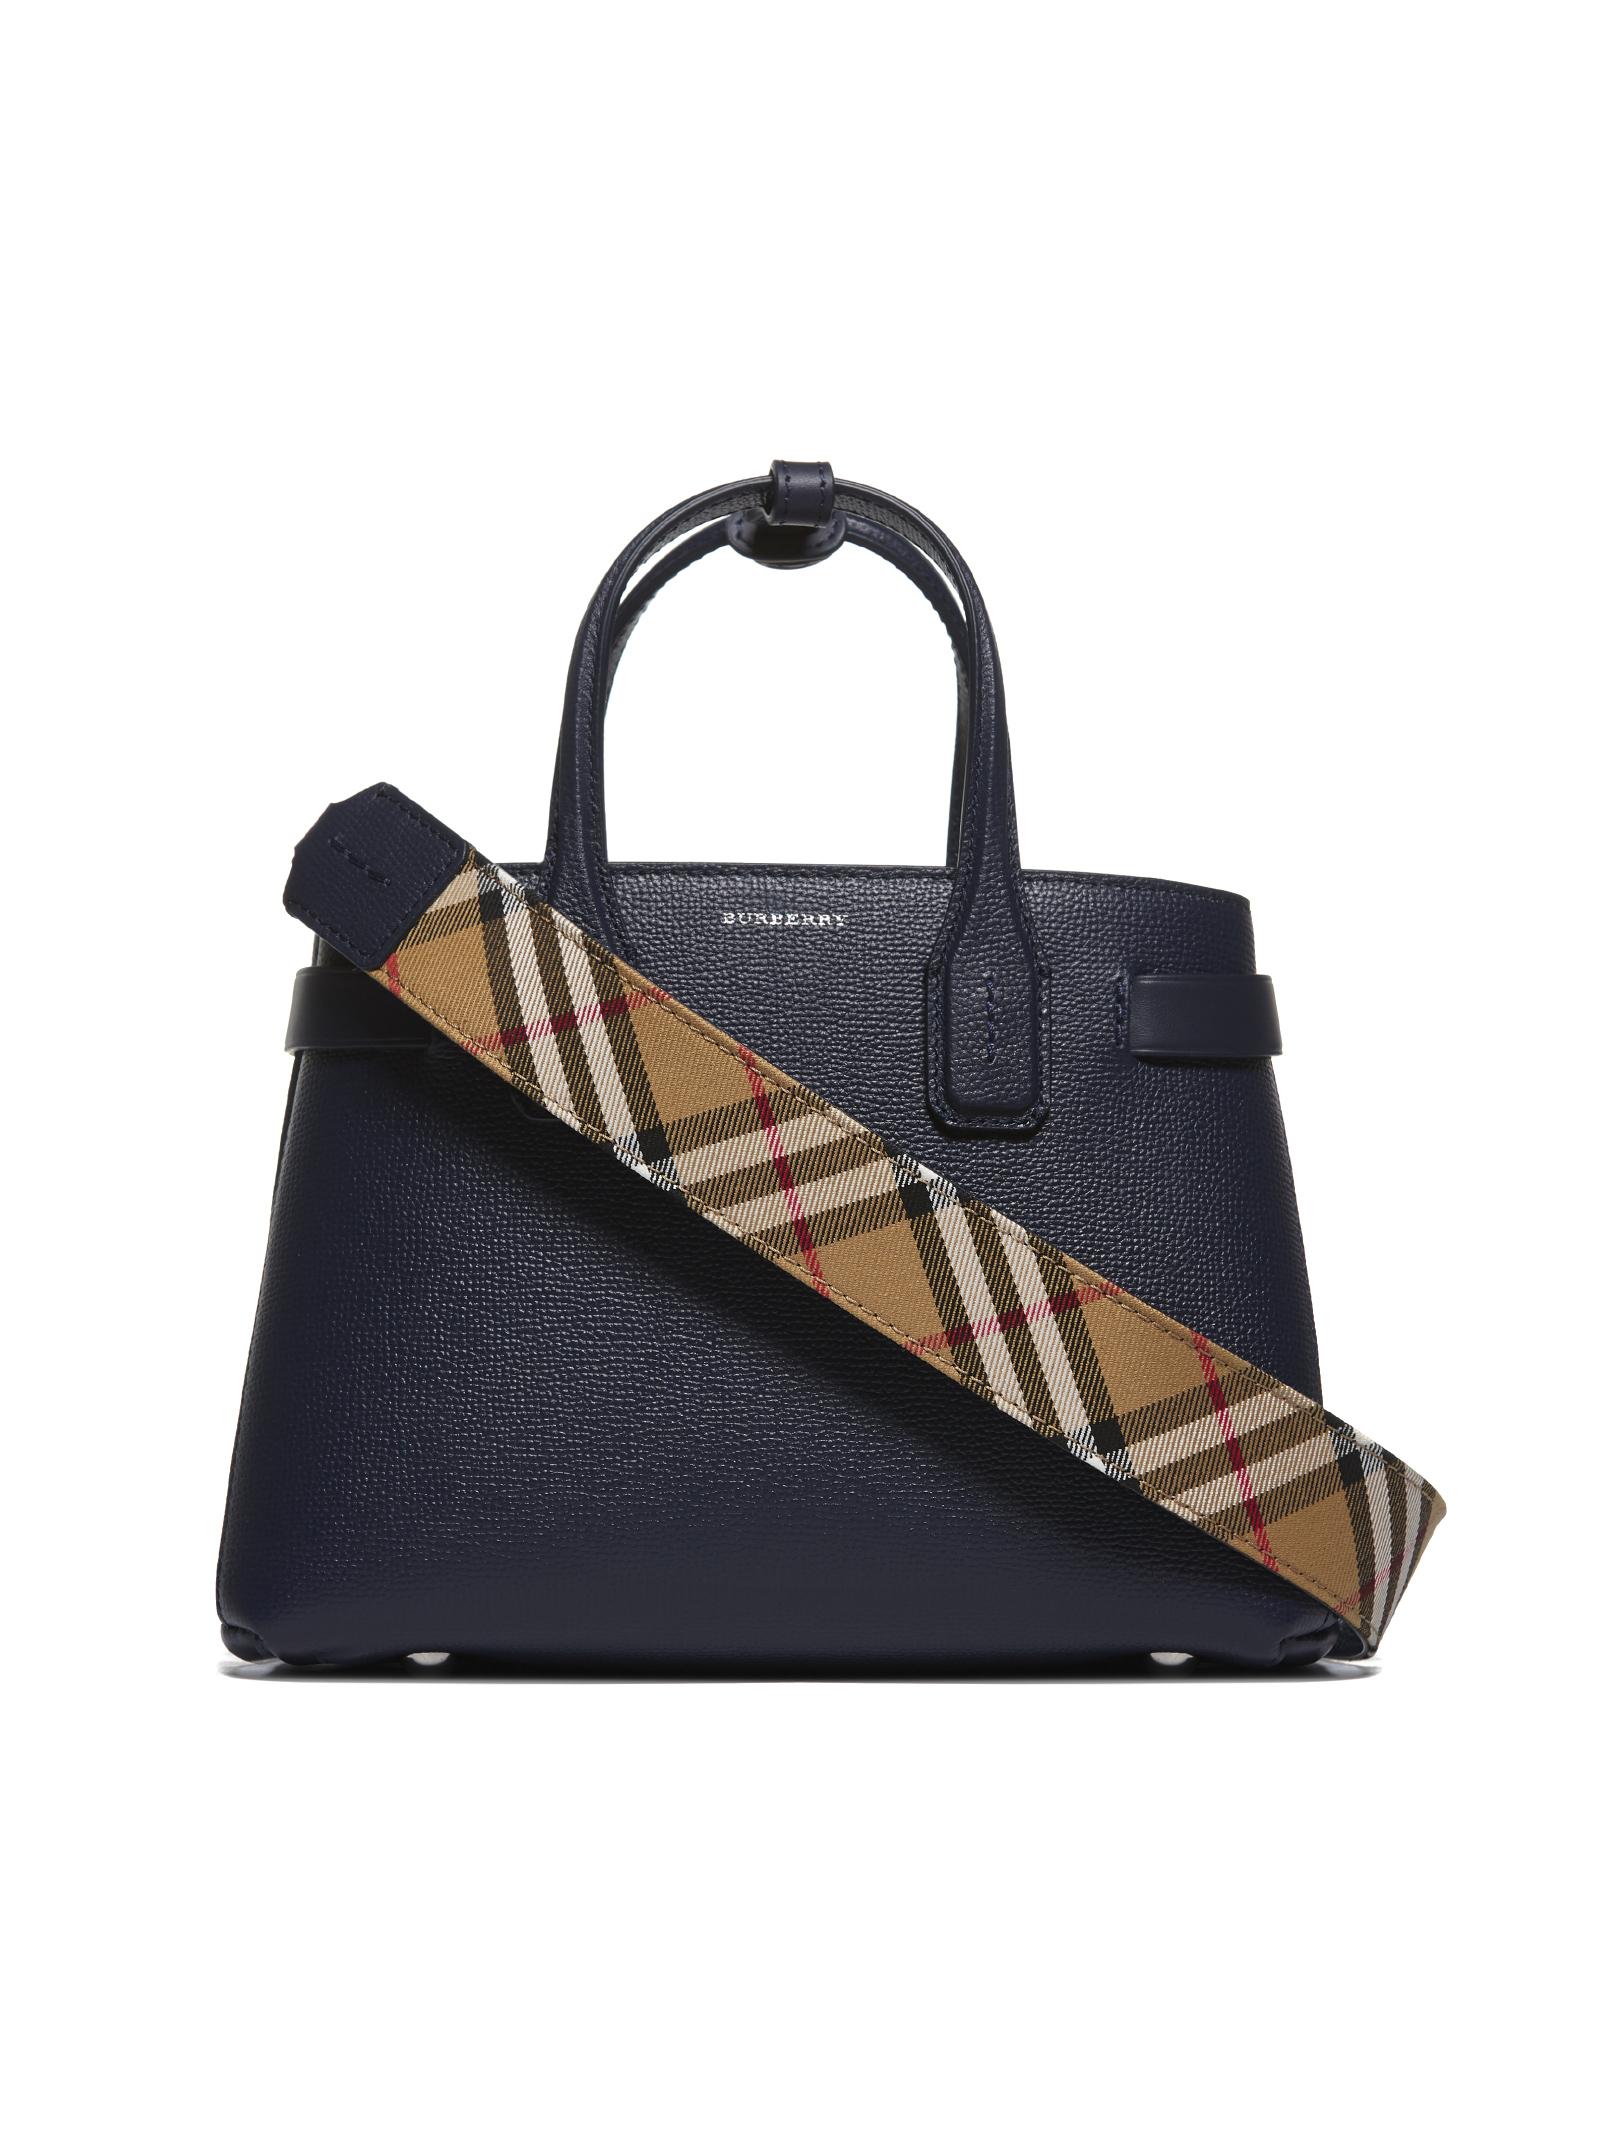 Orphan menneskelige ressourcer Syd Burberry Leather Small Banner Tote Bag in Navy (Blue) - Lyst